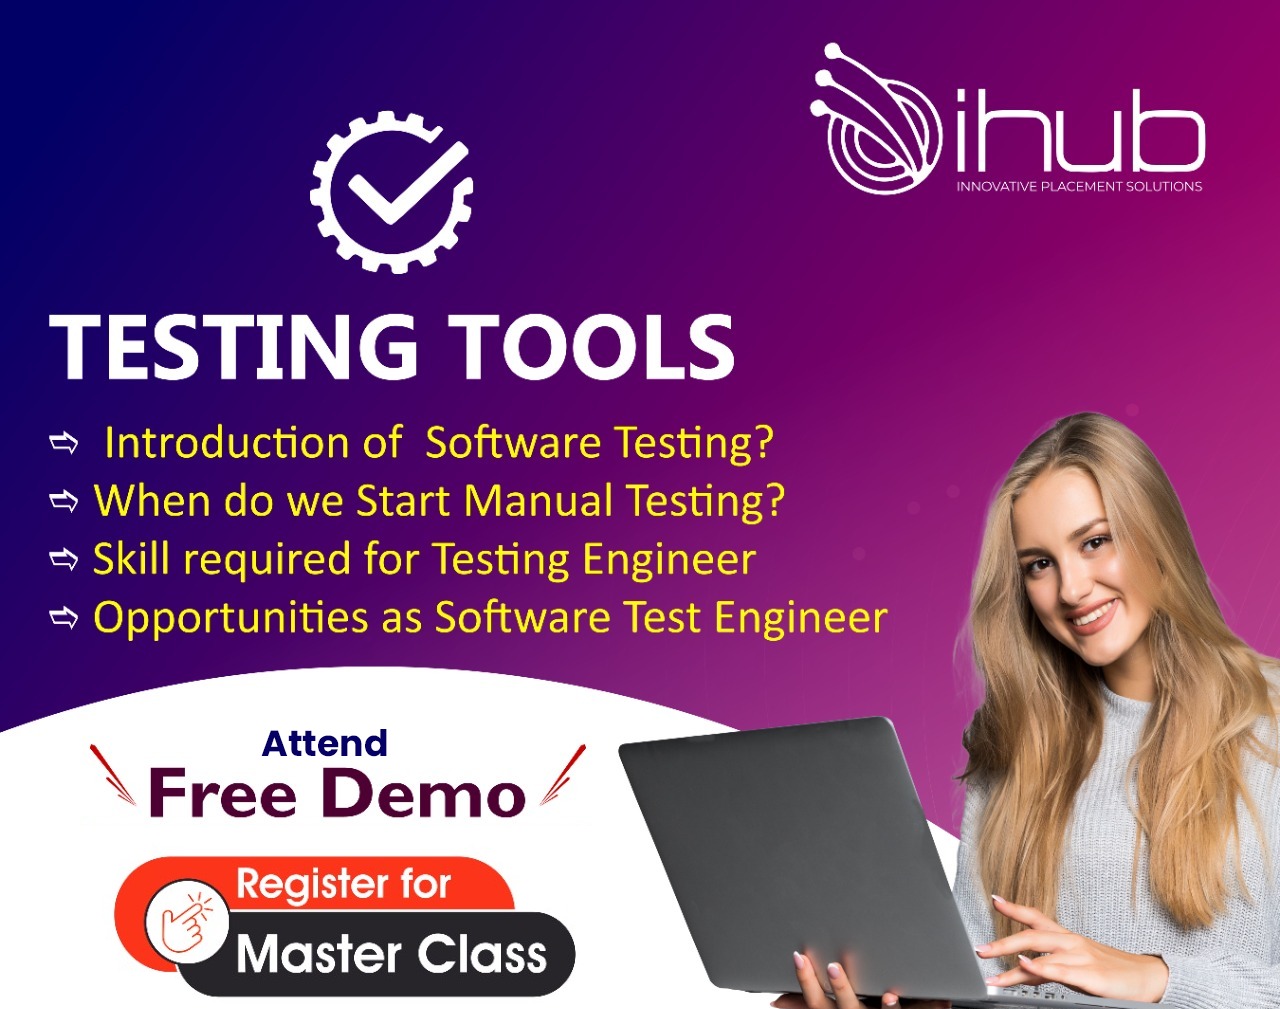 Software testing tools course in Hyderabad - iHub TalentEducation and LearningCoaching ClassesAll Indiaother